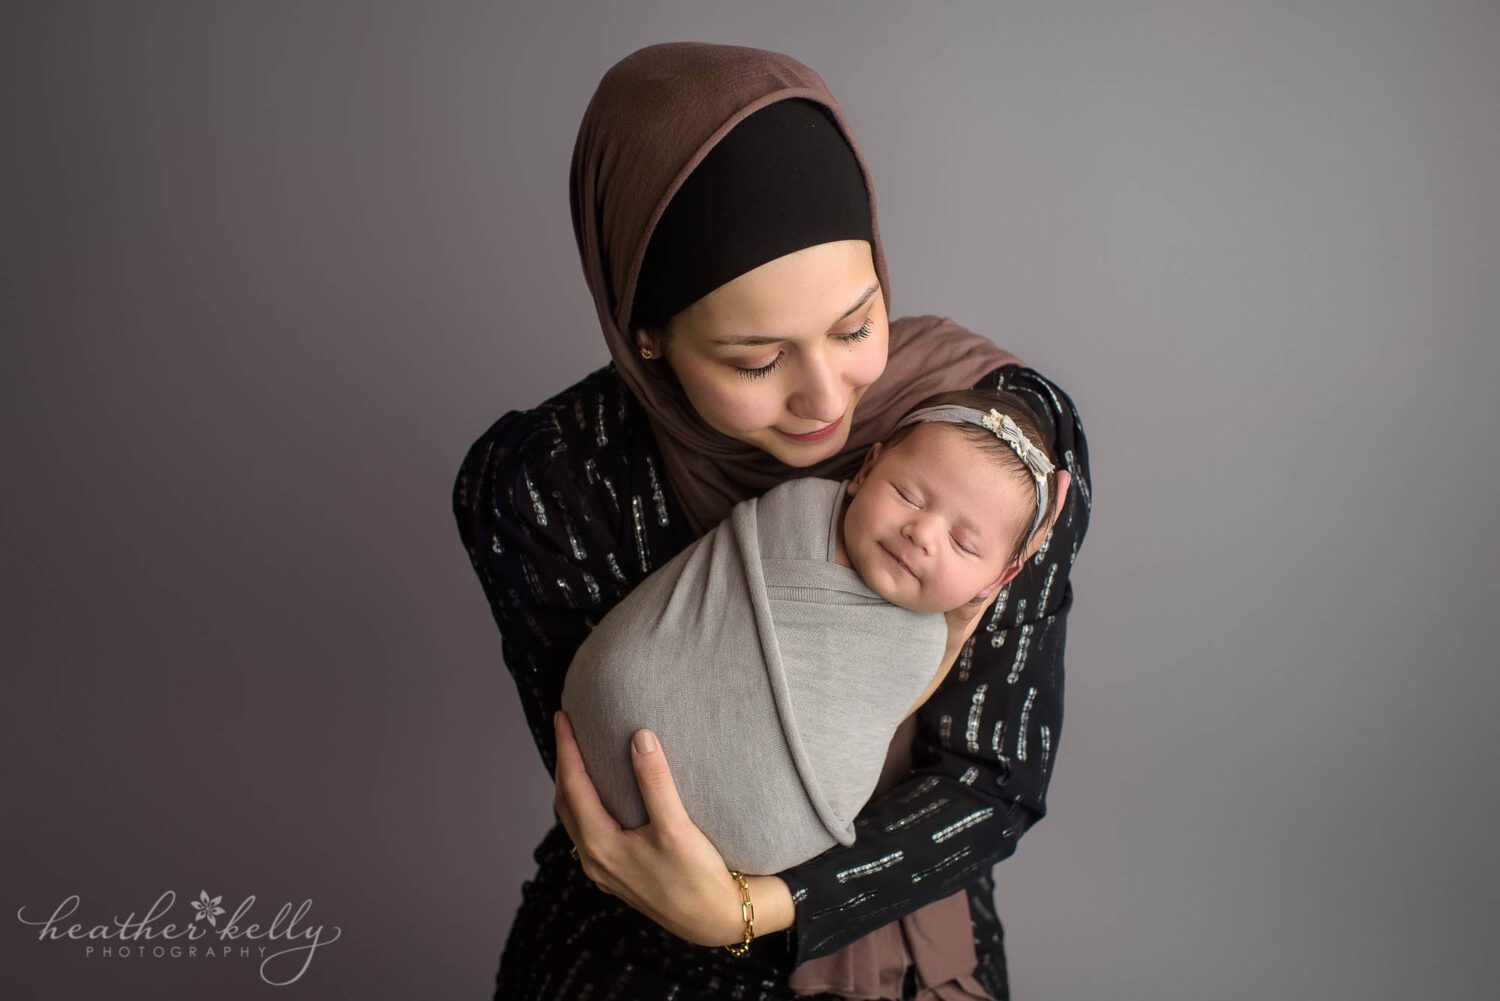 mom and newborn baby. Mom is holding a newborn girl that is wrapped in a gray swaddle. She is looking down at her in a newborn photography pose